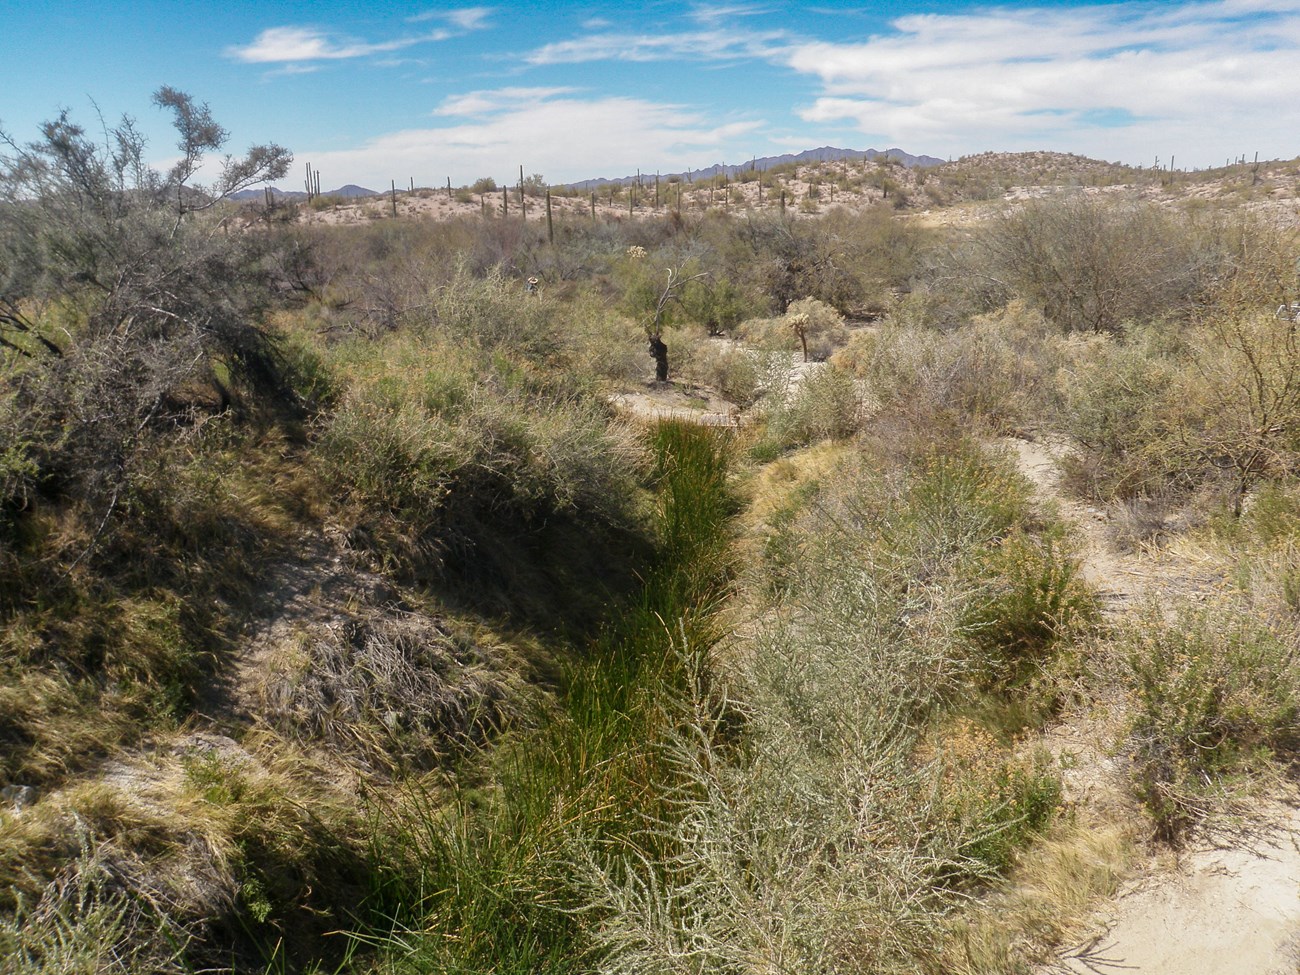 A narrow drainage is detectable underneath vegetation that is brighter green than the surrounding desert foliage.